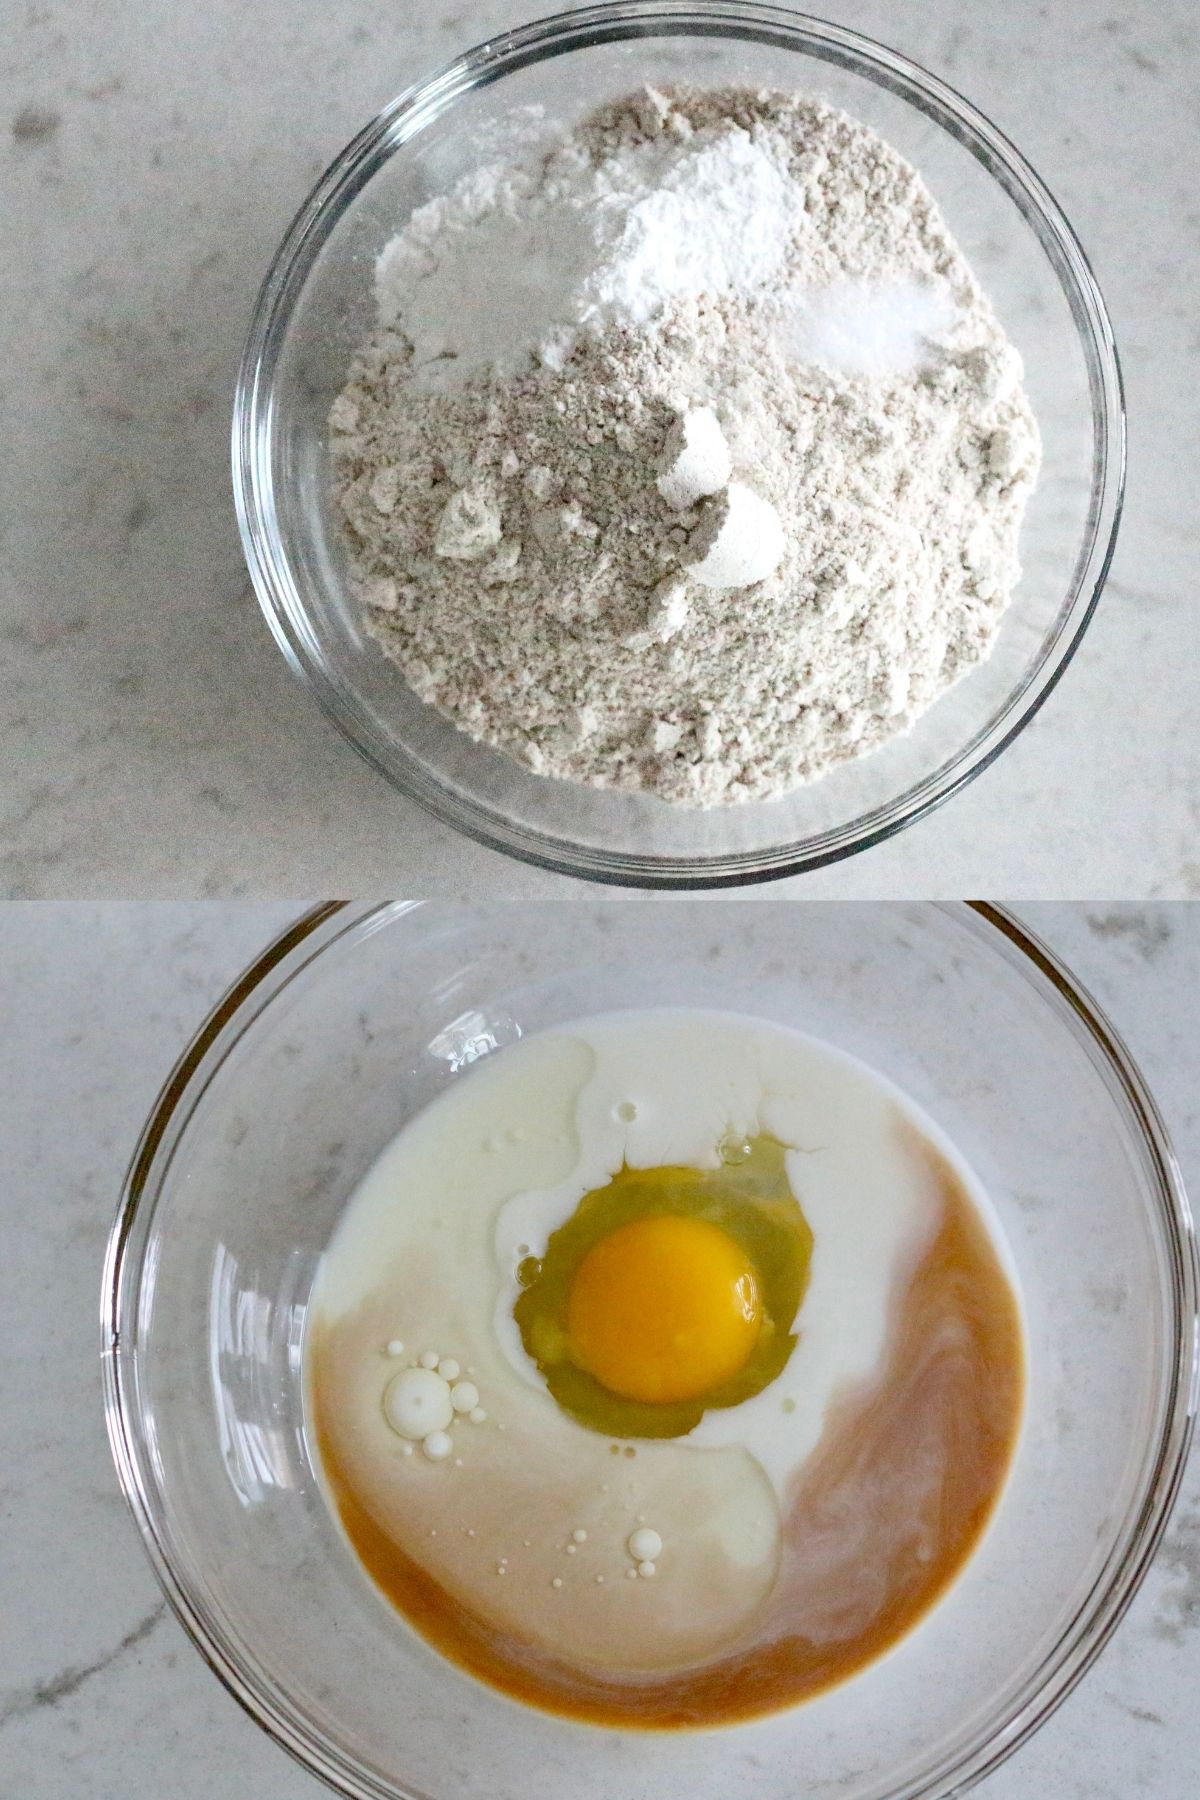 Two pictures, first is dry ingredients in a glass bowl and second is wet ingredients in a glass bowl.